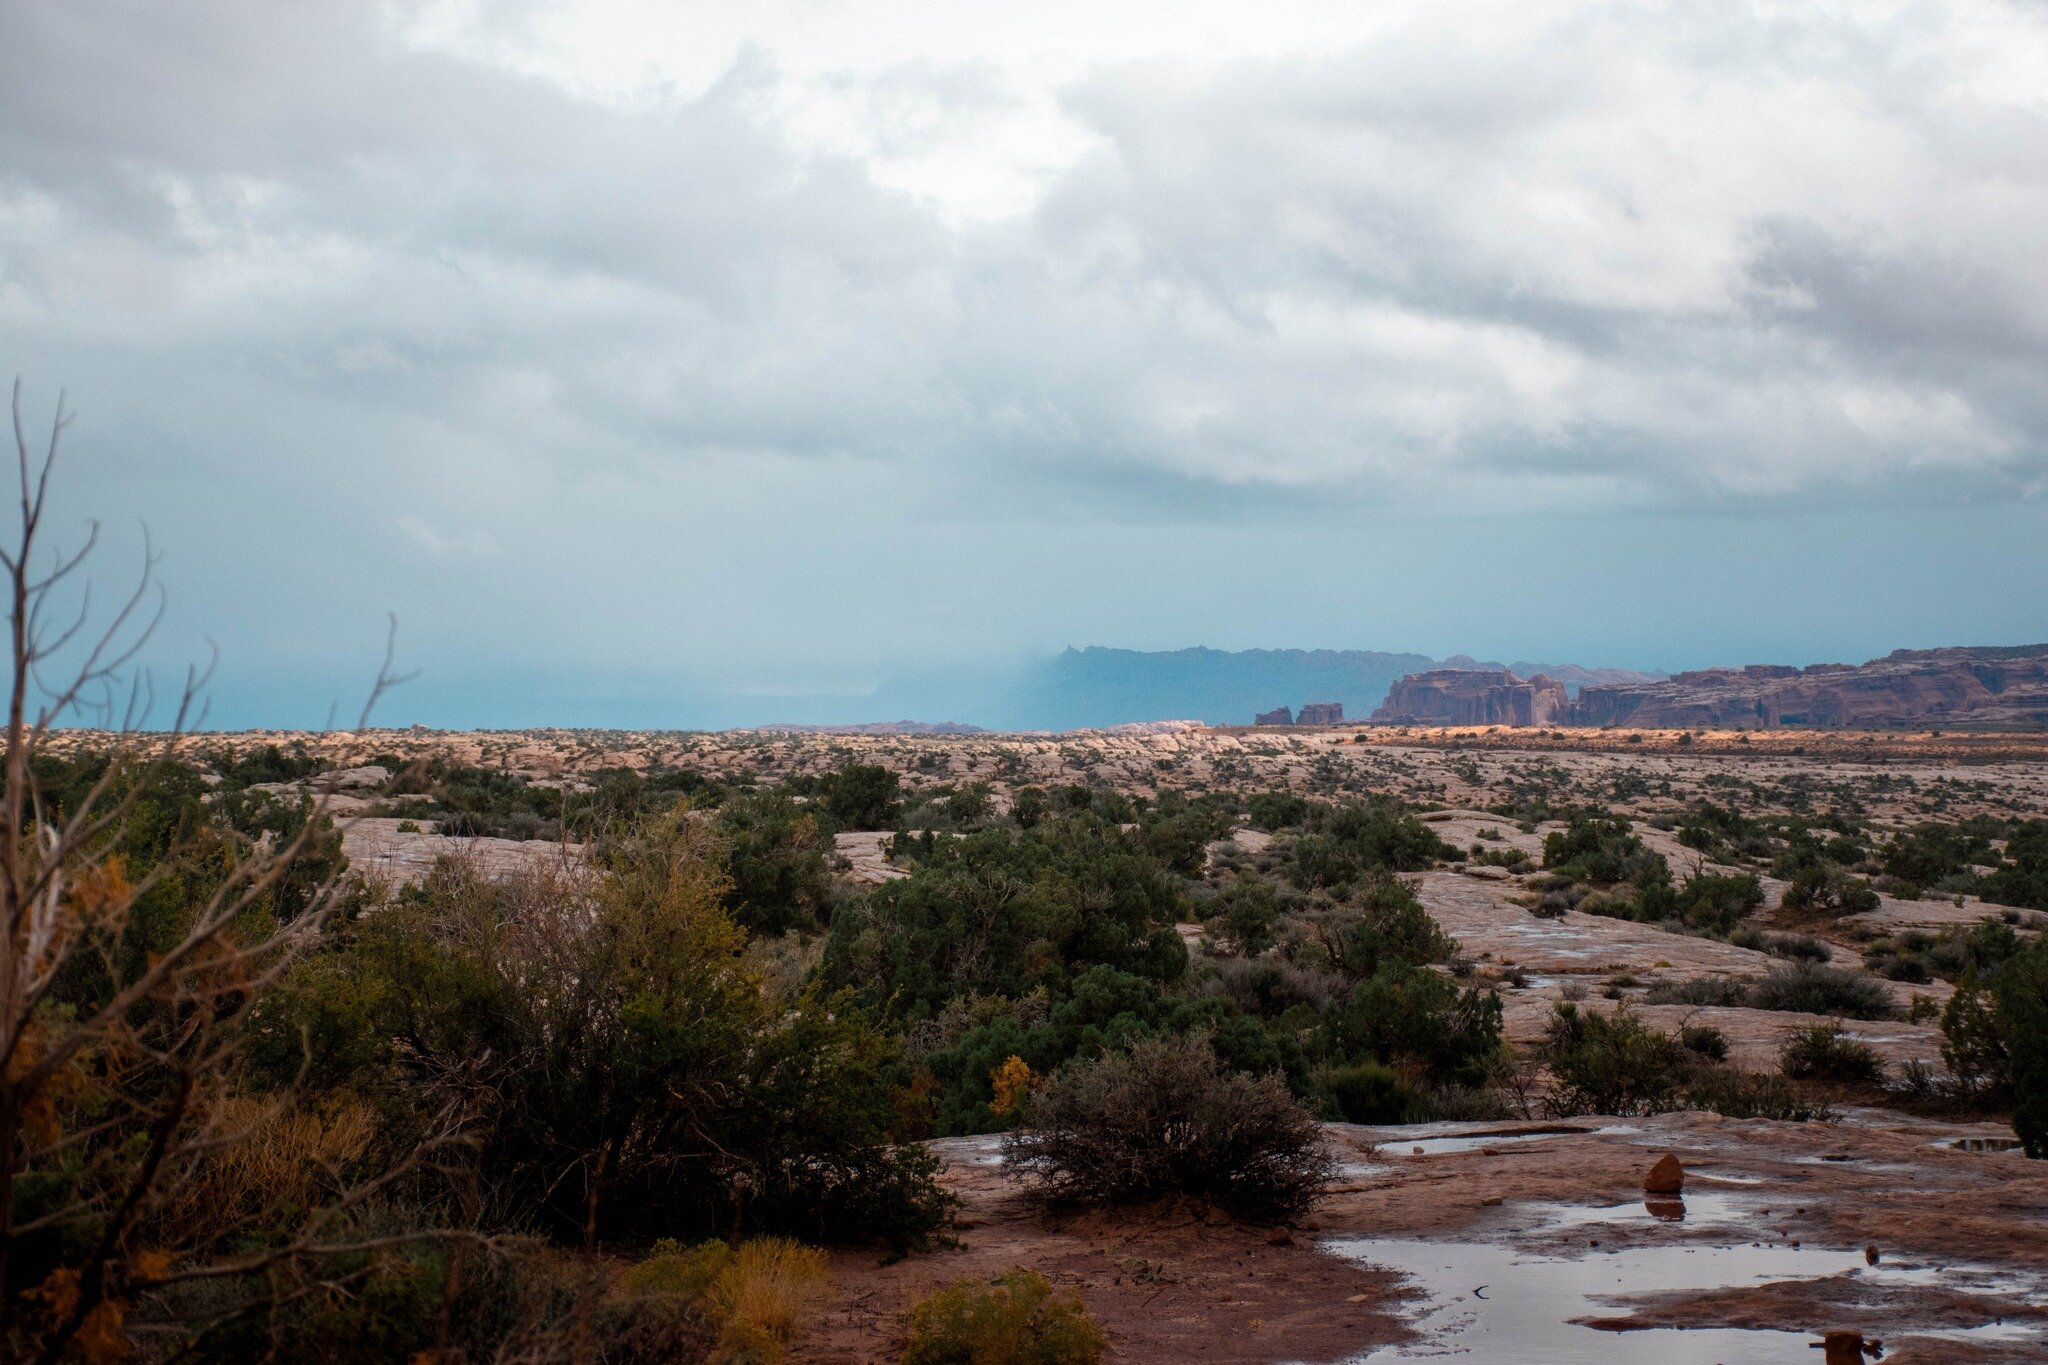 Throwback to when we watched a storm roll in while exploring the backroads of Arches NP 😍 this was one of my favorite experiences to date
.
#travelphotographer #stlouisphotographer #stlphotog #stlphotographer #stlphotographers #landscapephotohub #la